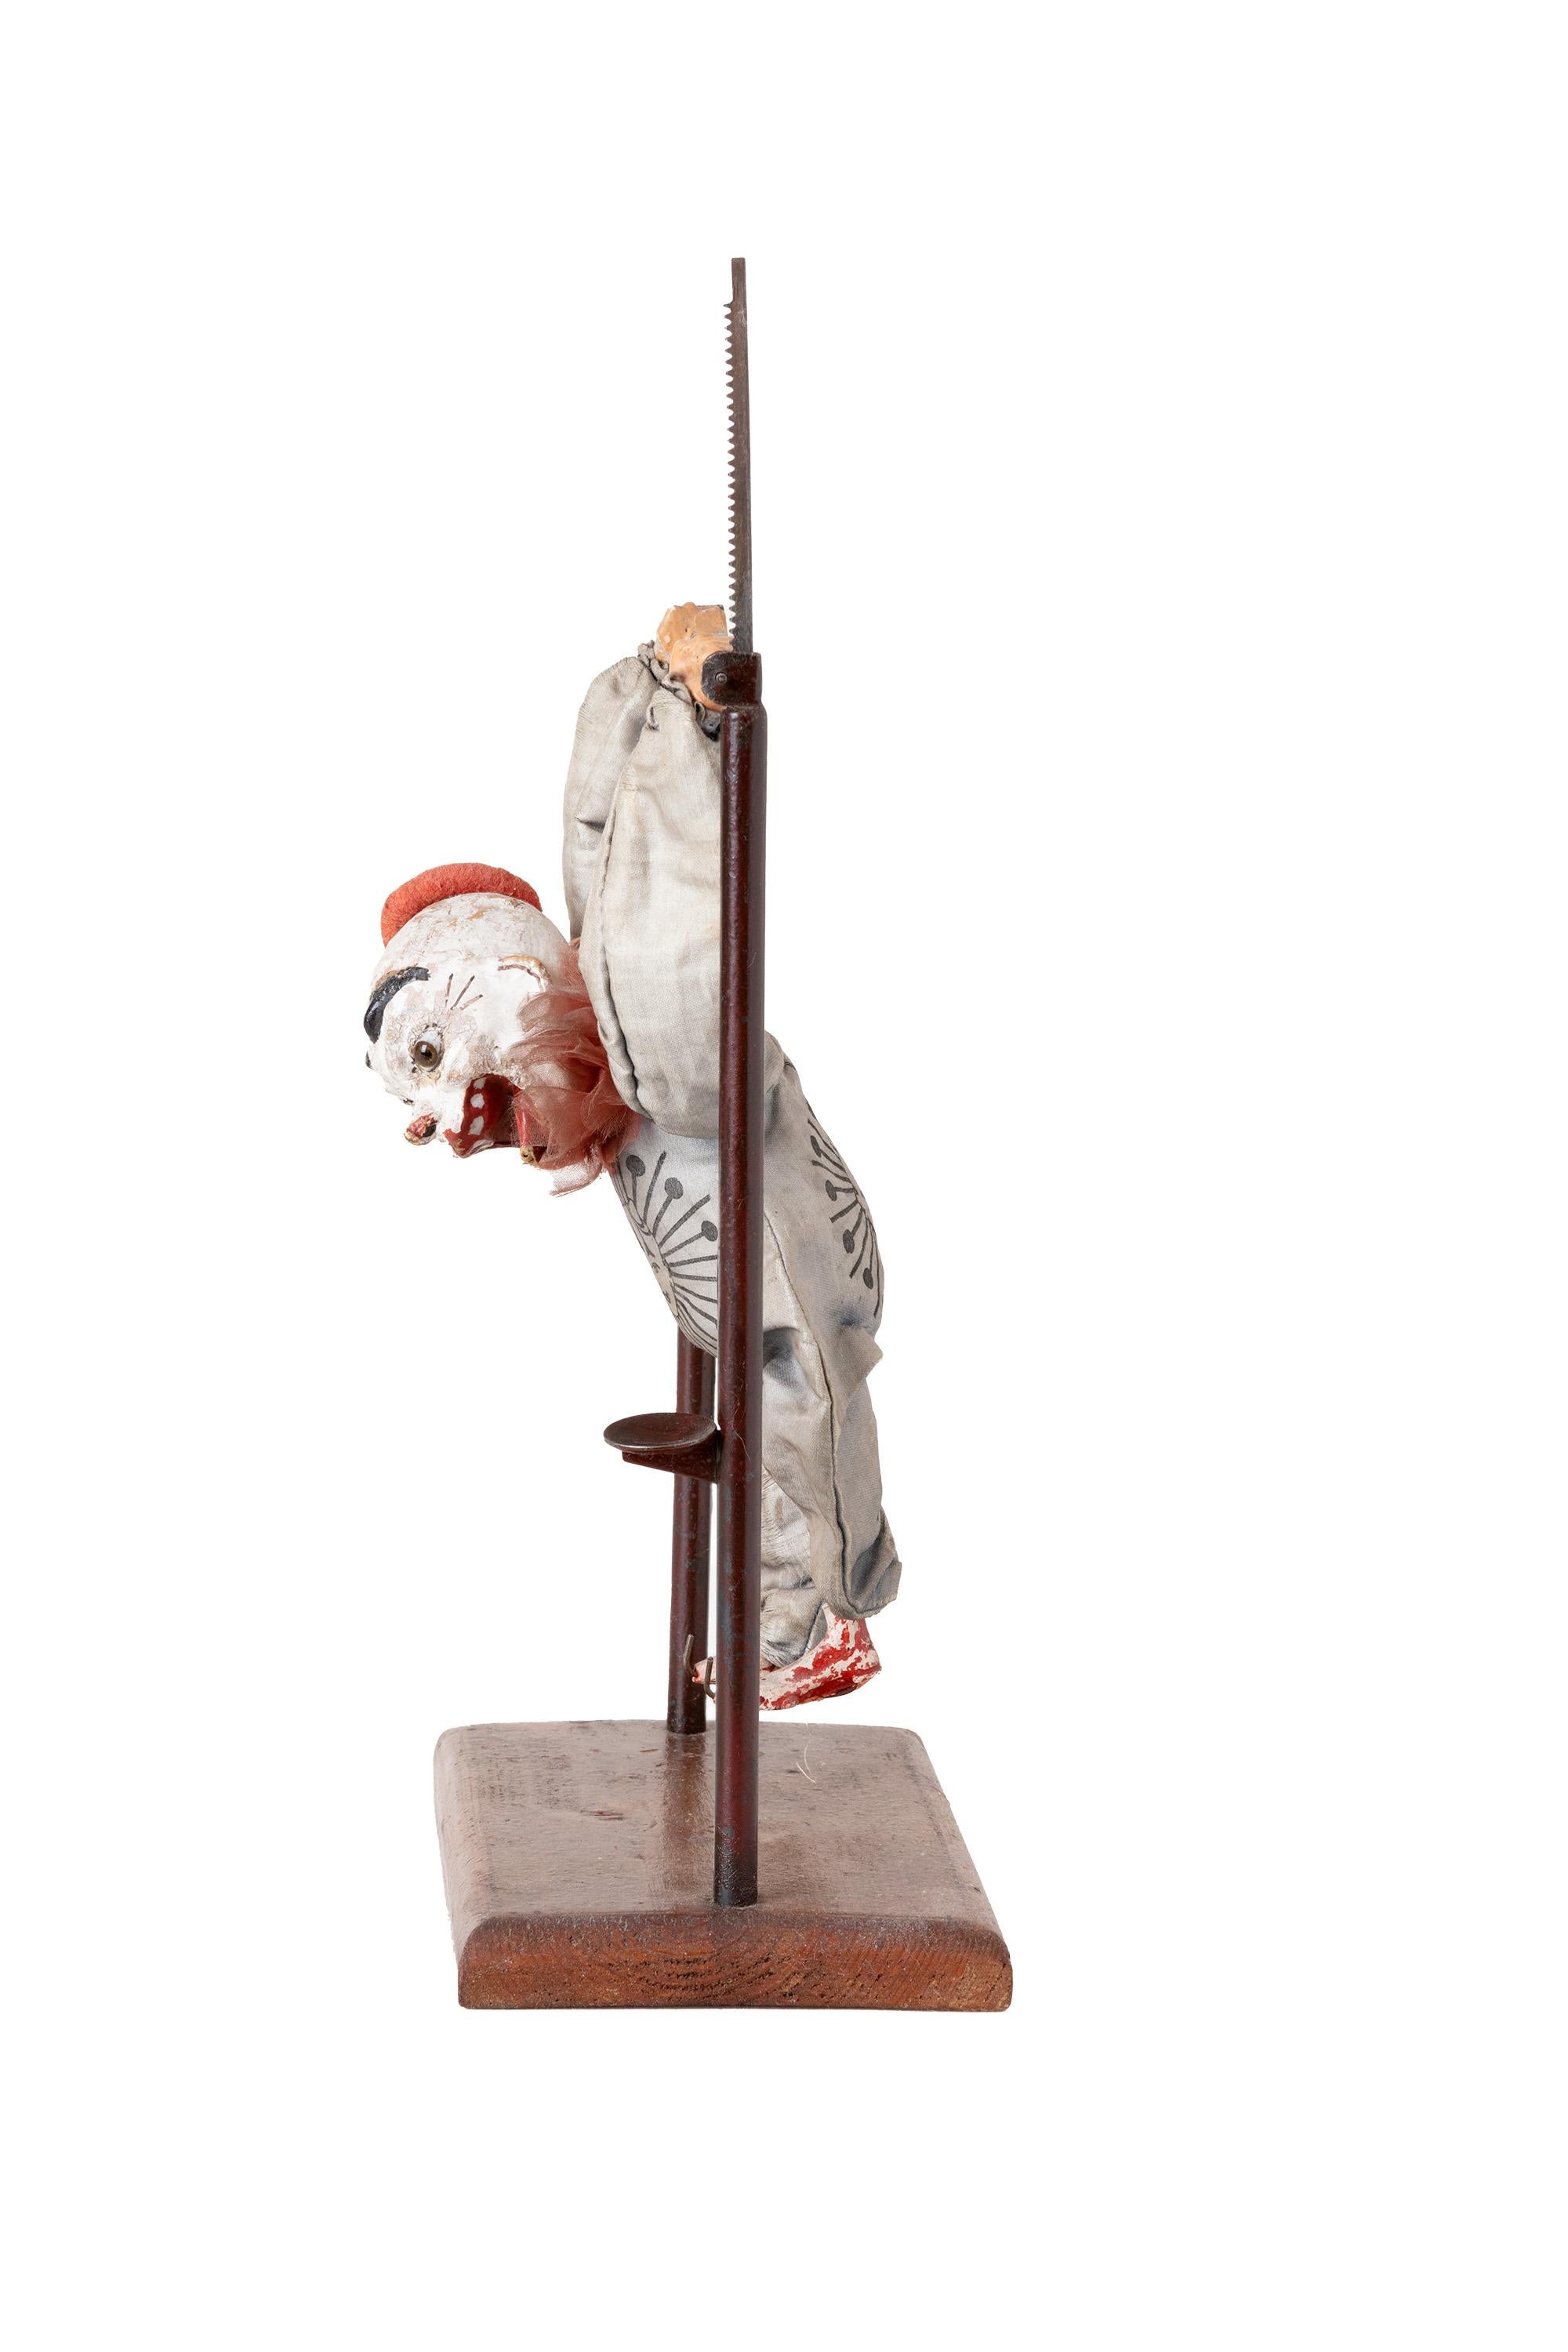 'Circus Gymnast' 19th Century - Sculpture by Unknown